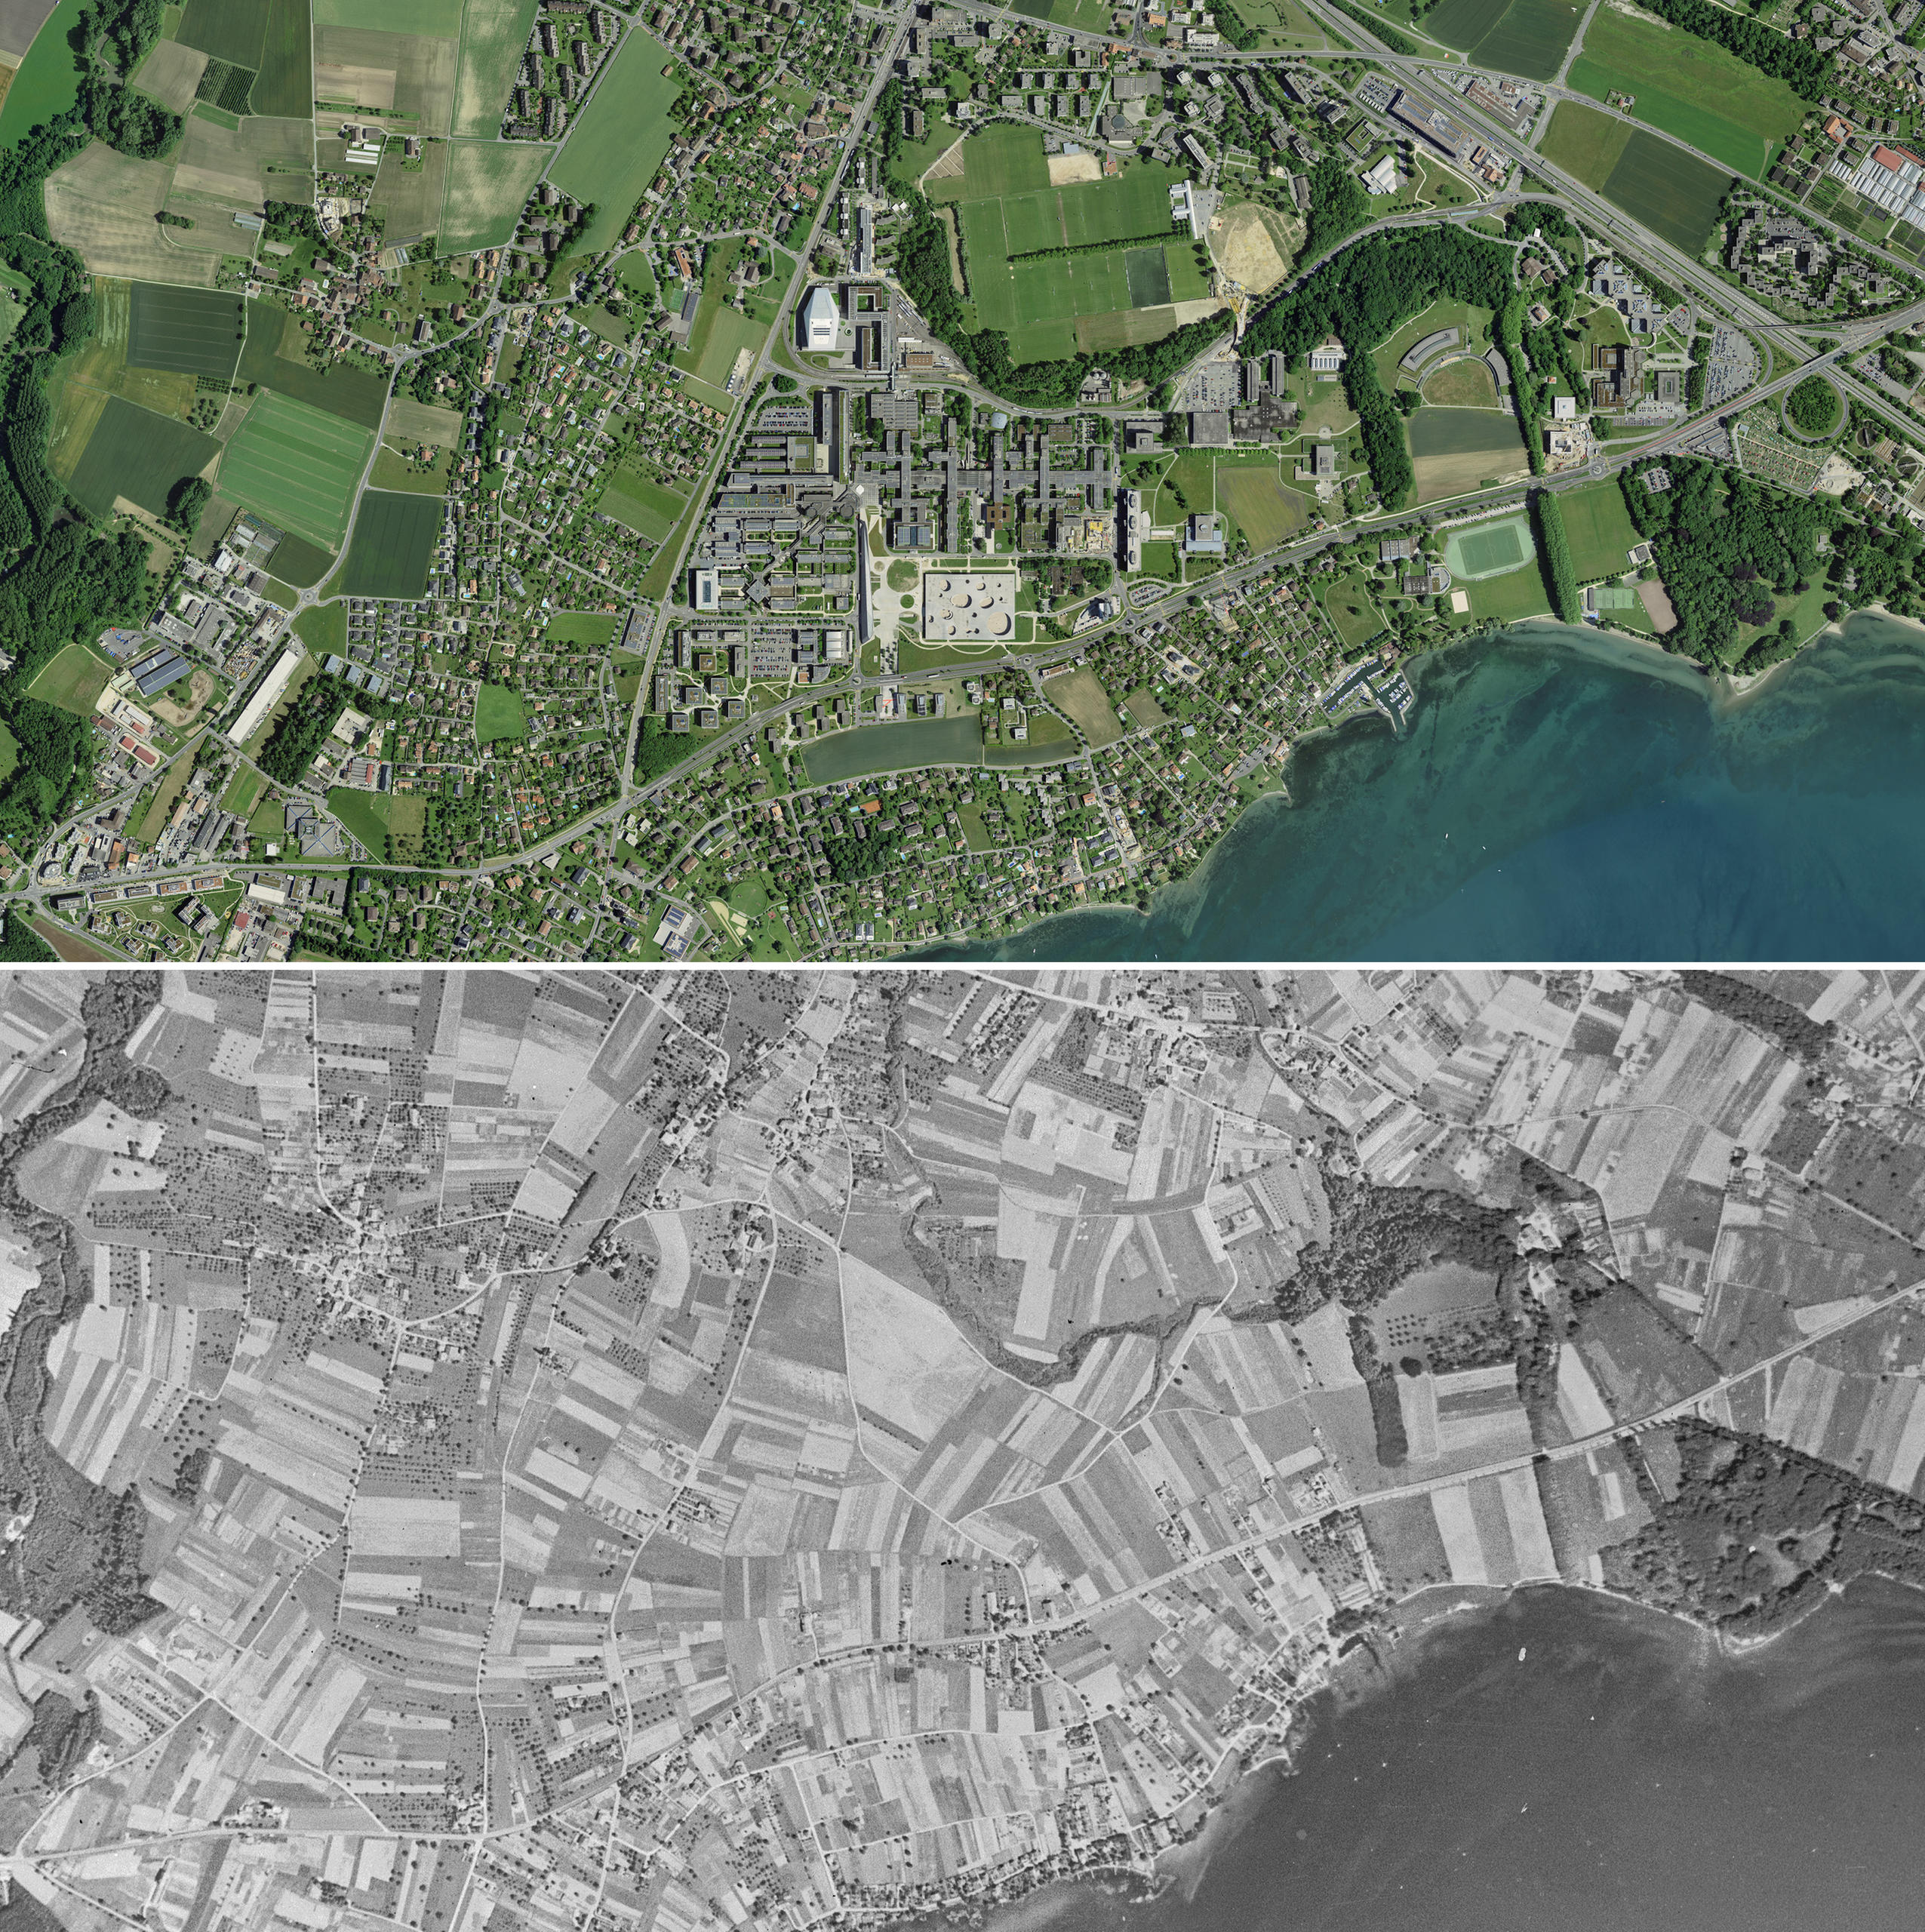 Aerial view of Ecublens above in 2017 and below in 1946